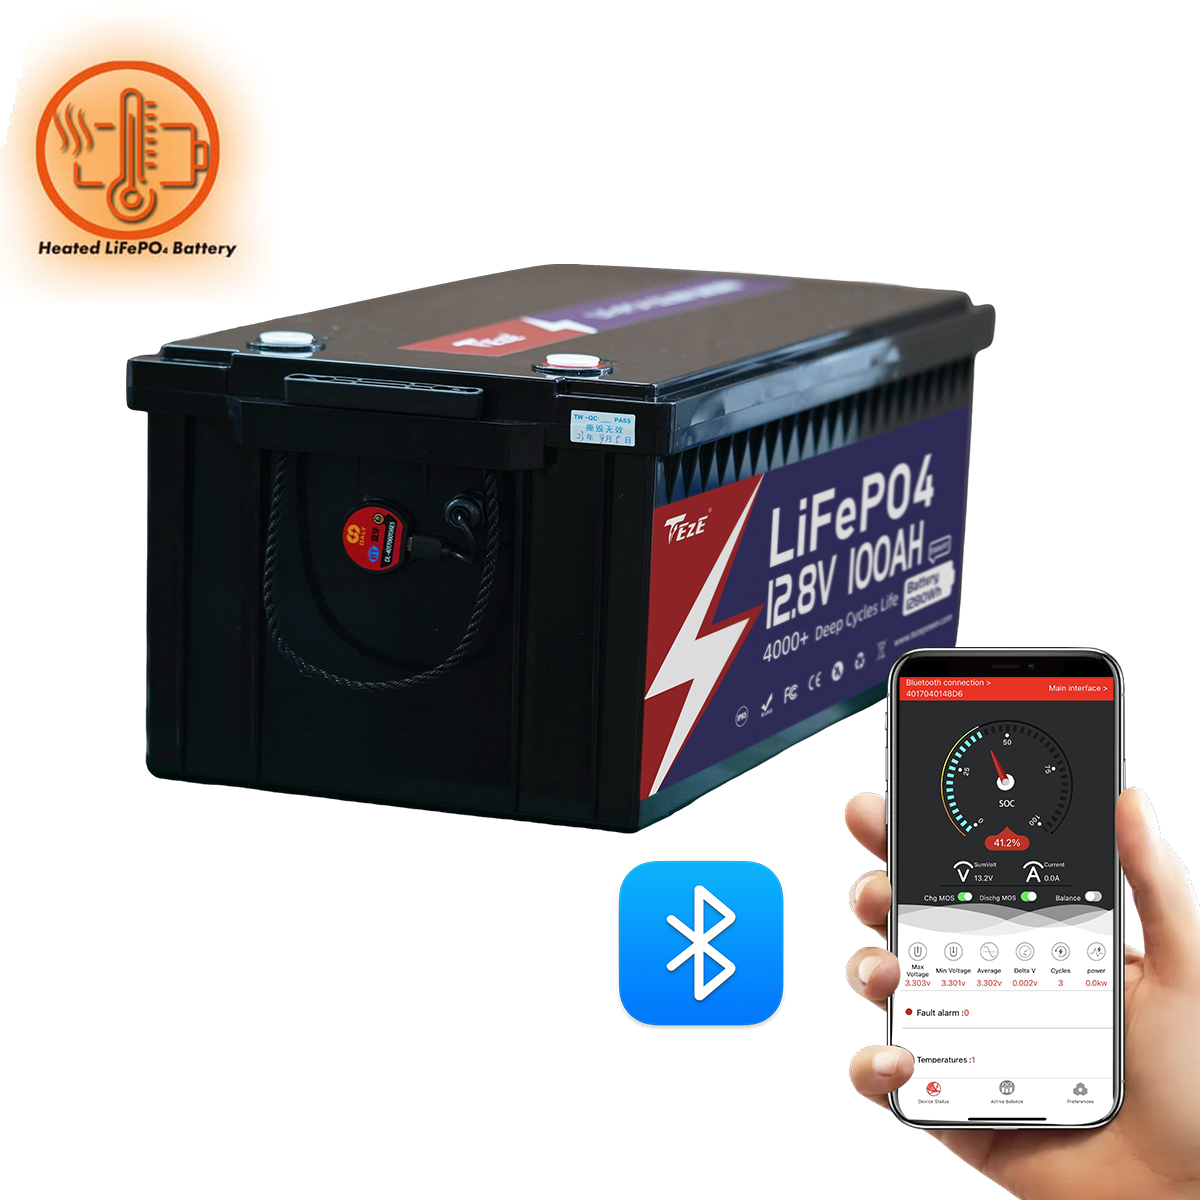 NEW-TezePower 12V100Ah LiFePO4 Battery with Bluetooth, Self-heating and Active Balancer, Built-in 100A Daly BMS (Bluetooth External Version)